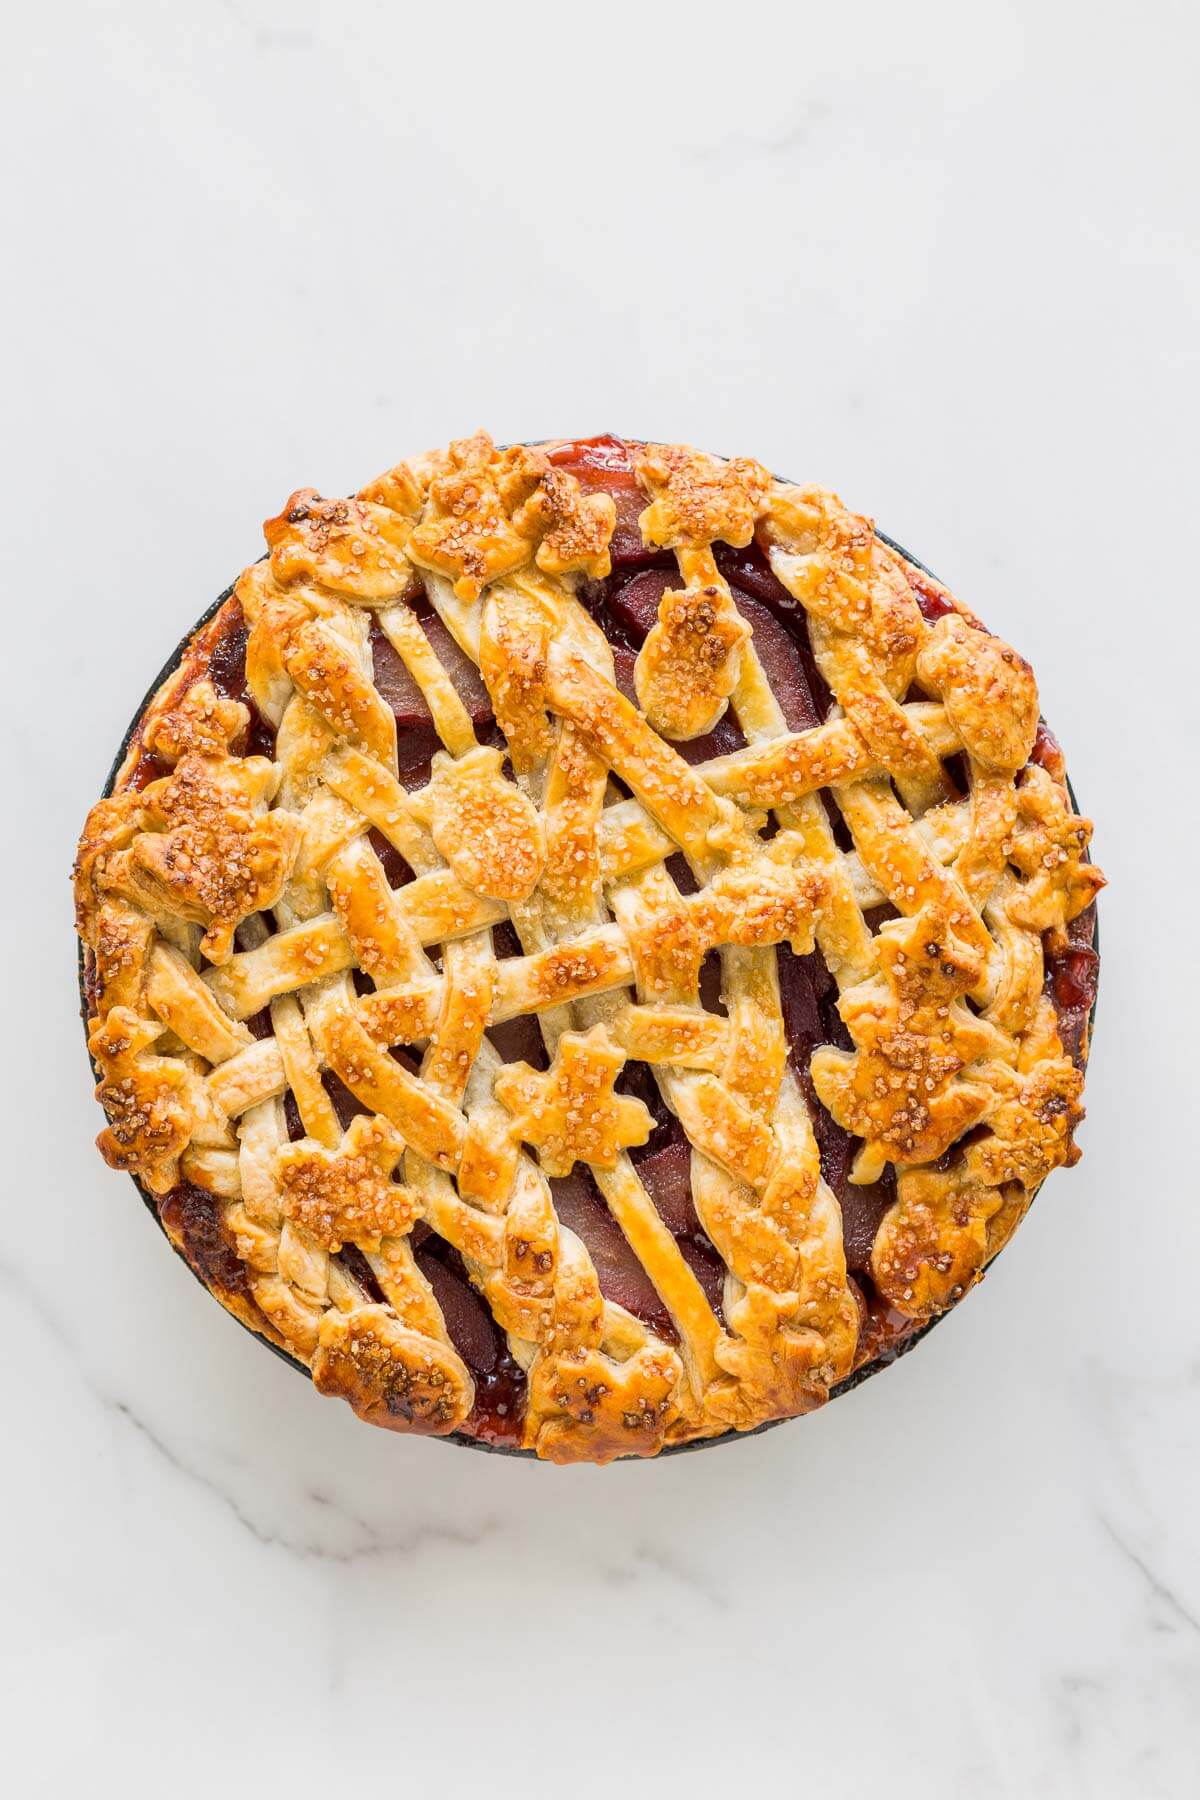 A lattice pie crust with woven in for a more elaborate and decorative top crust.